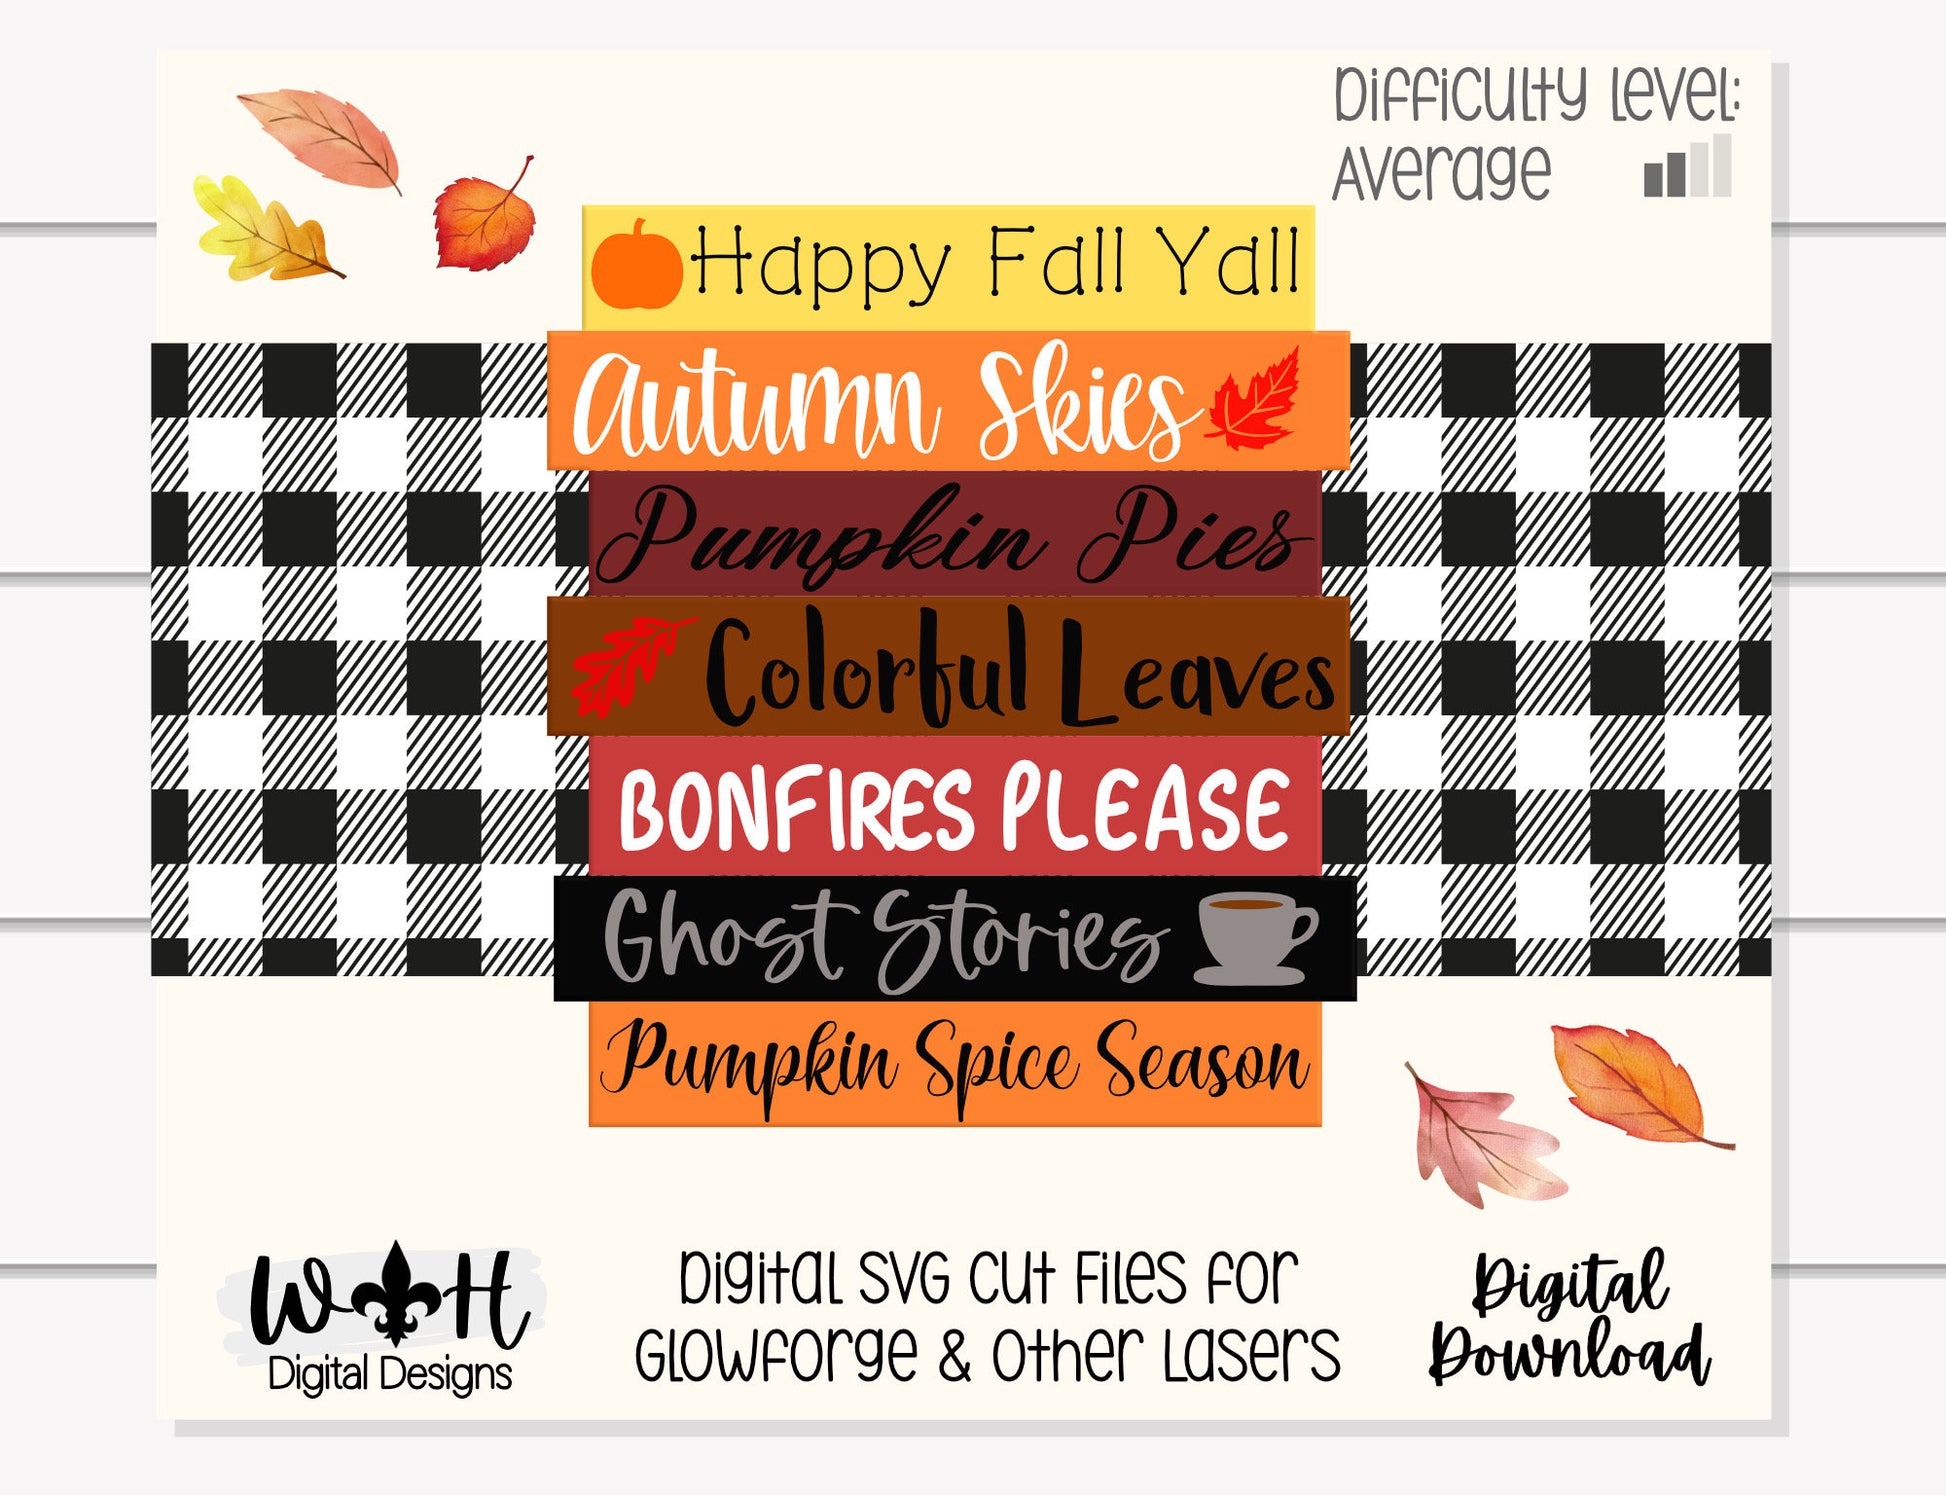 Happy Fall Yall Autumn Bucket List Stacked Sign - Seasonal Wall Decor and DIY Kits - Cut File For Glowforge Lasers - Digital SVG File